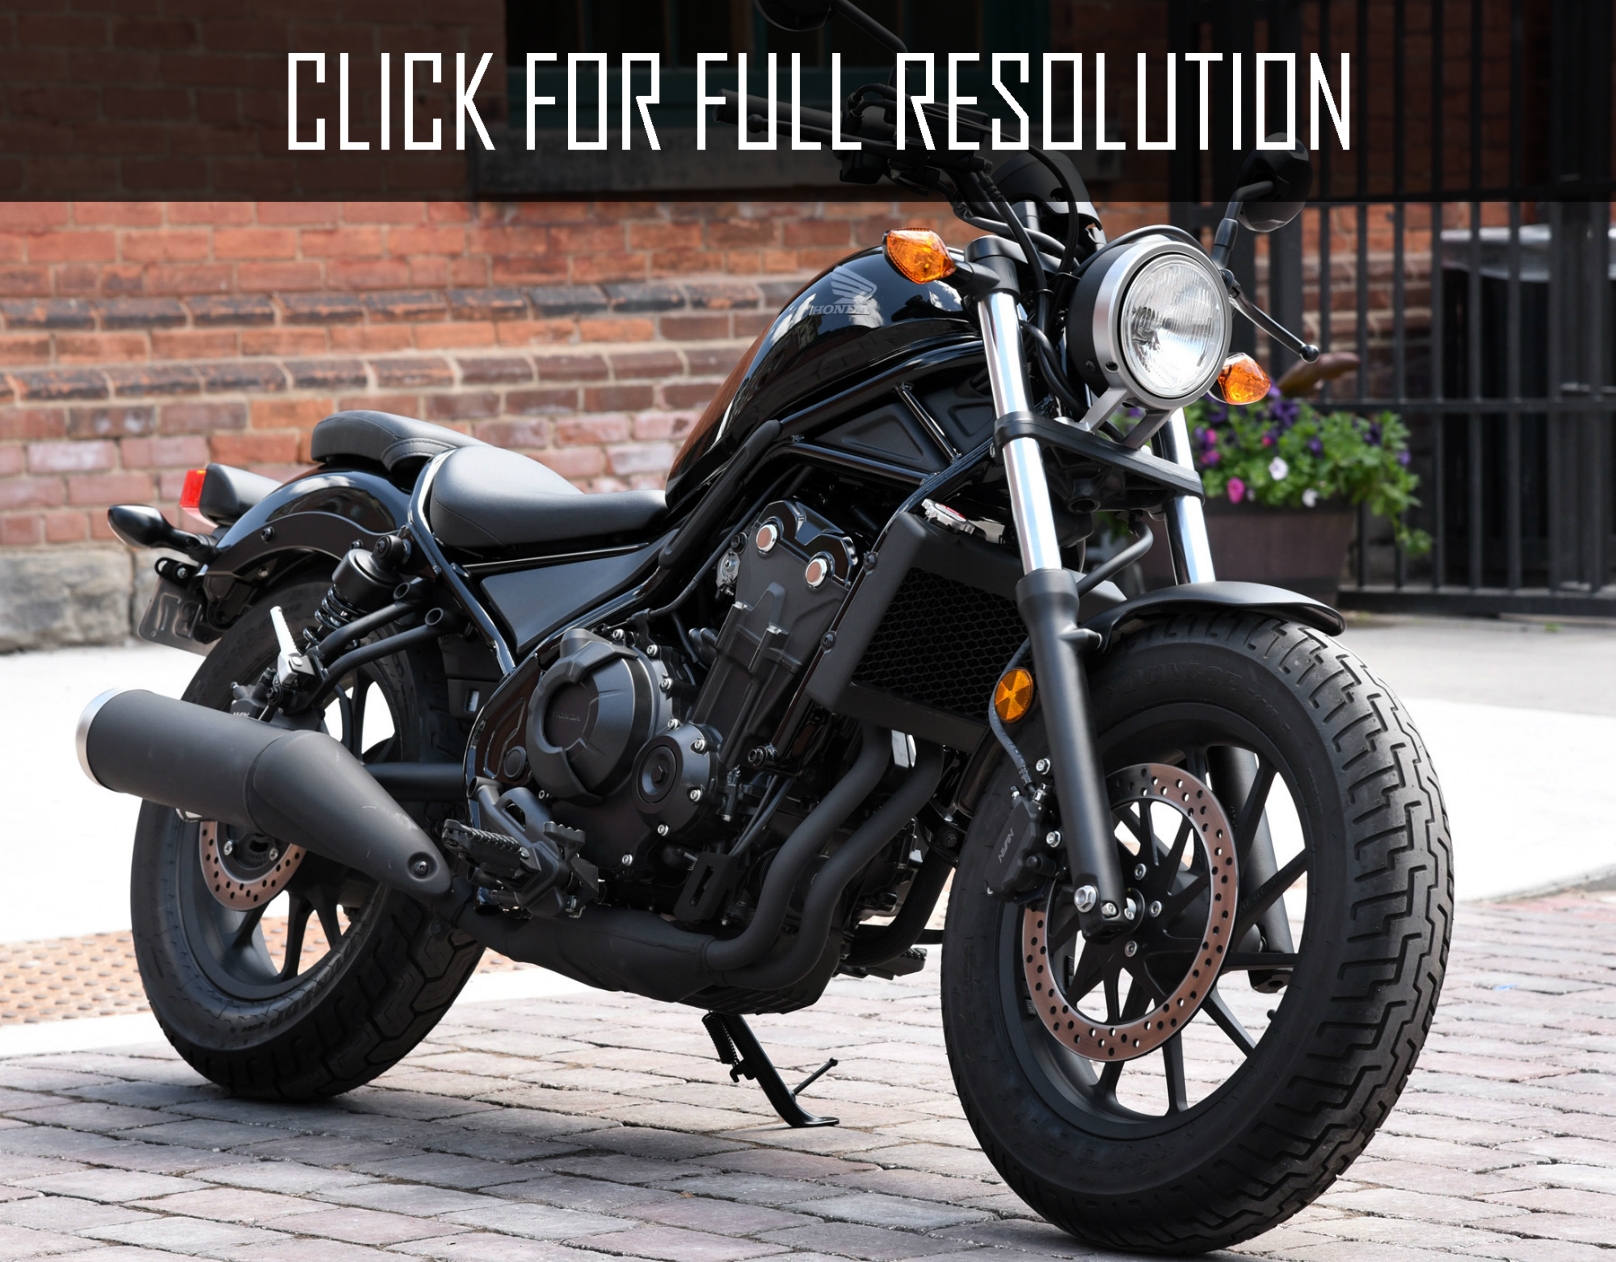 Honda Rebel 500 - amazing photo gallery, some information and ...